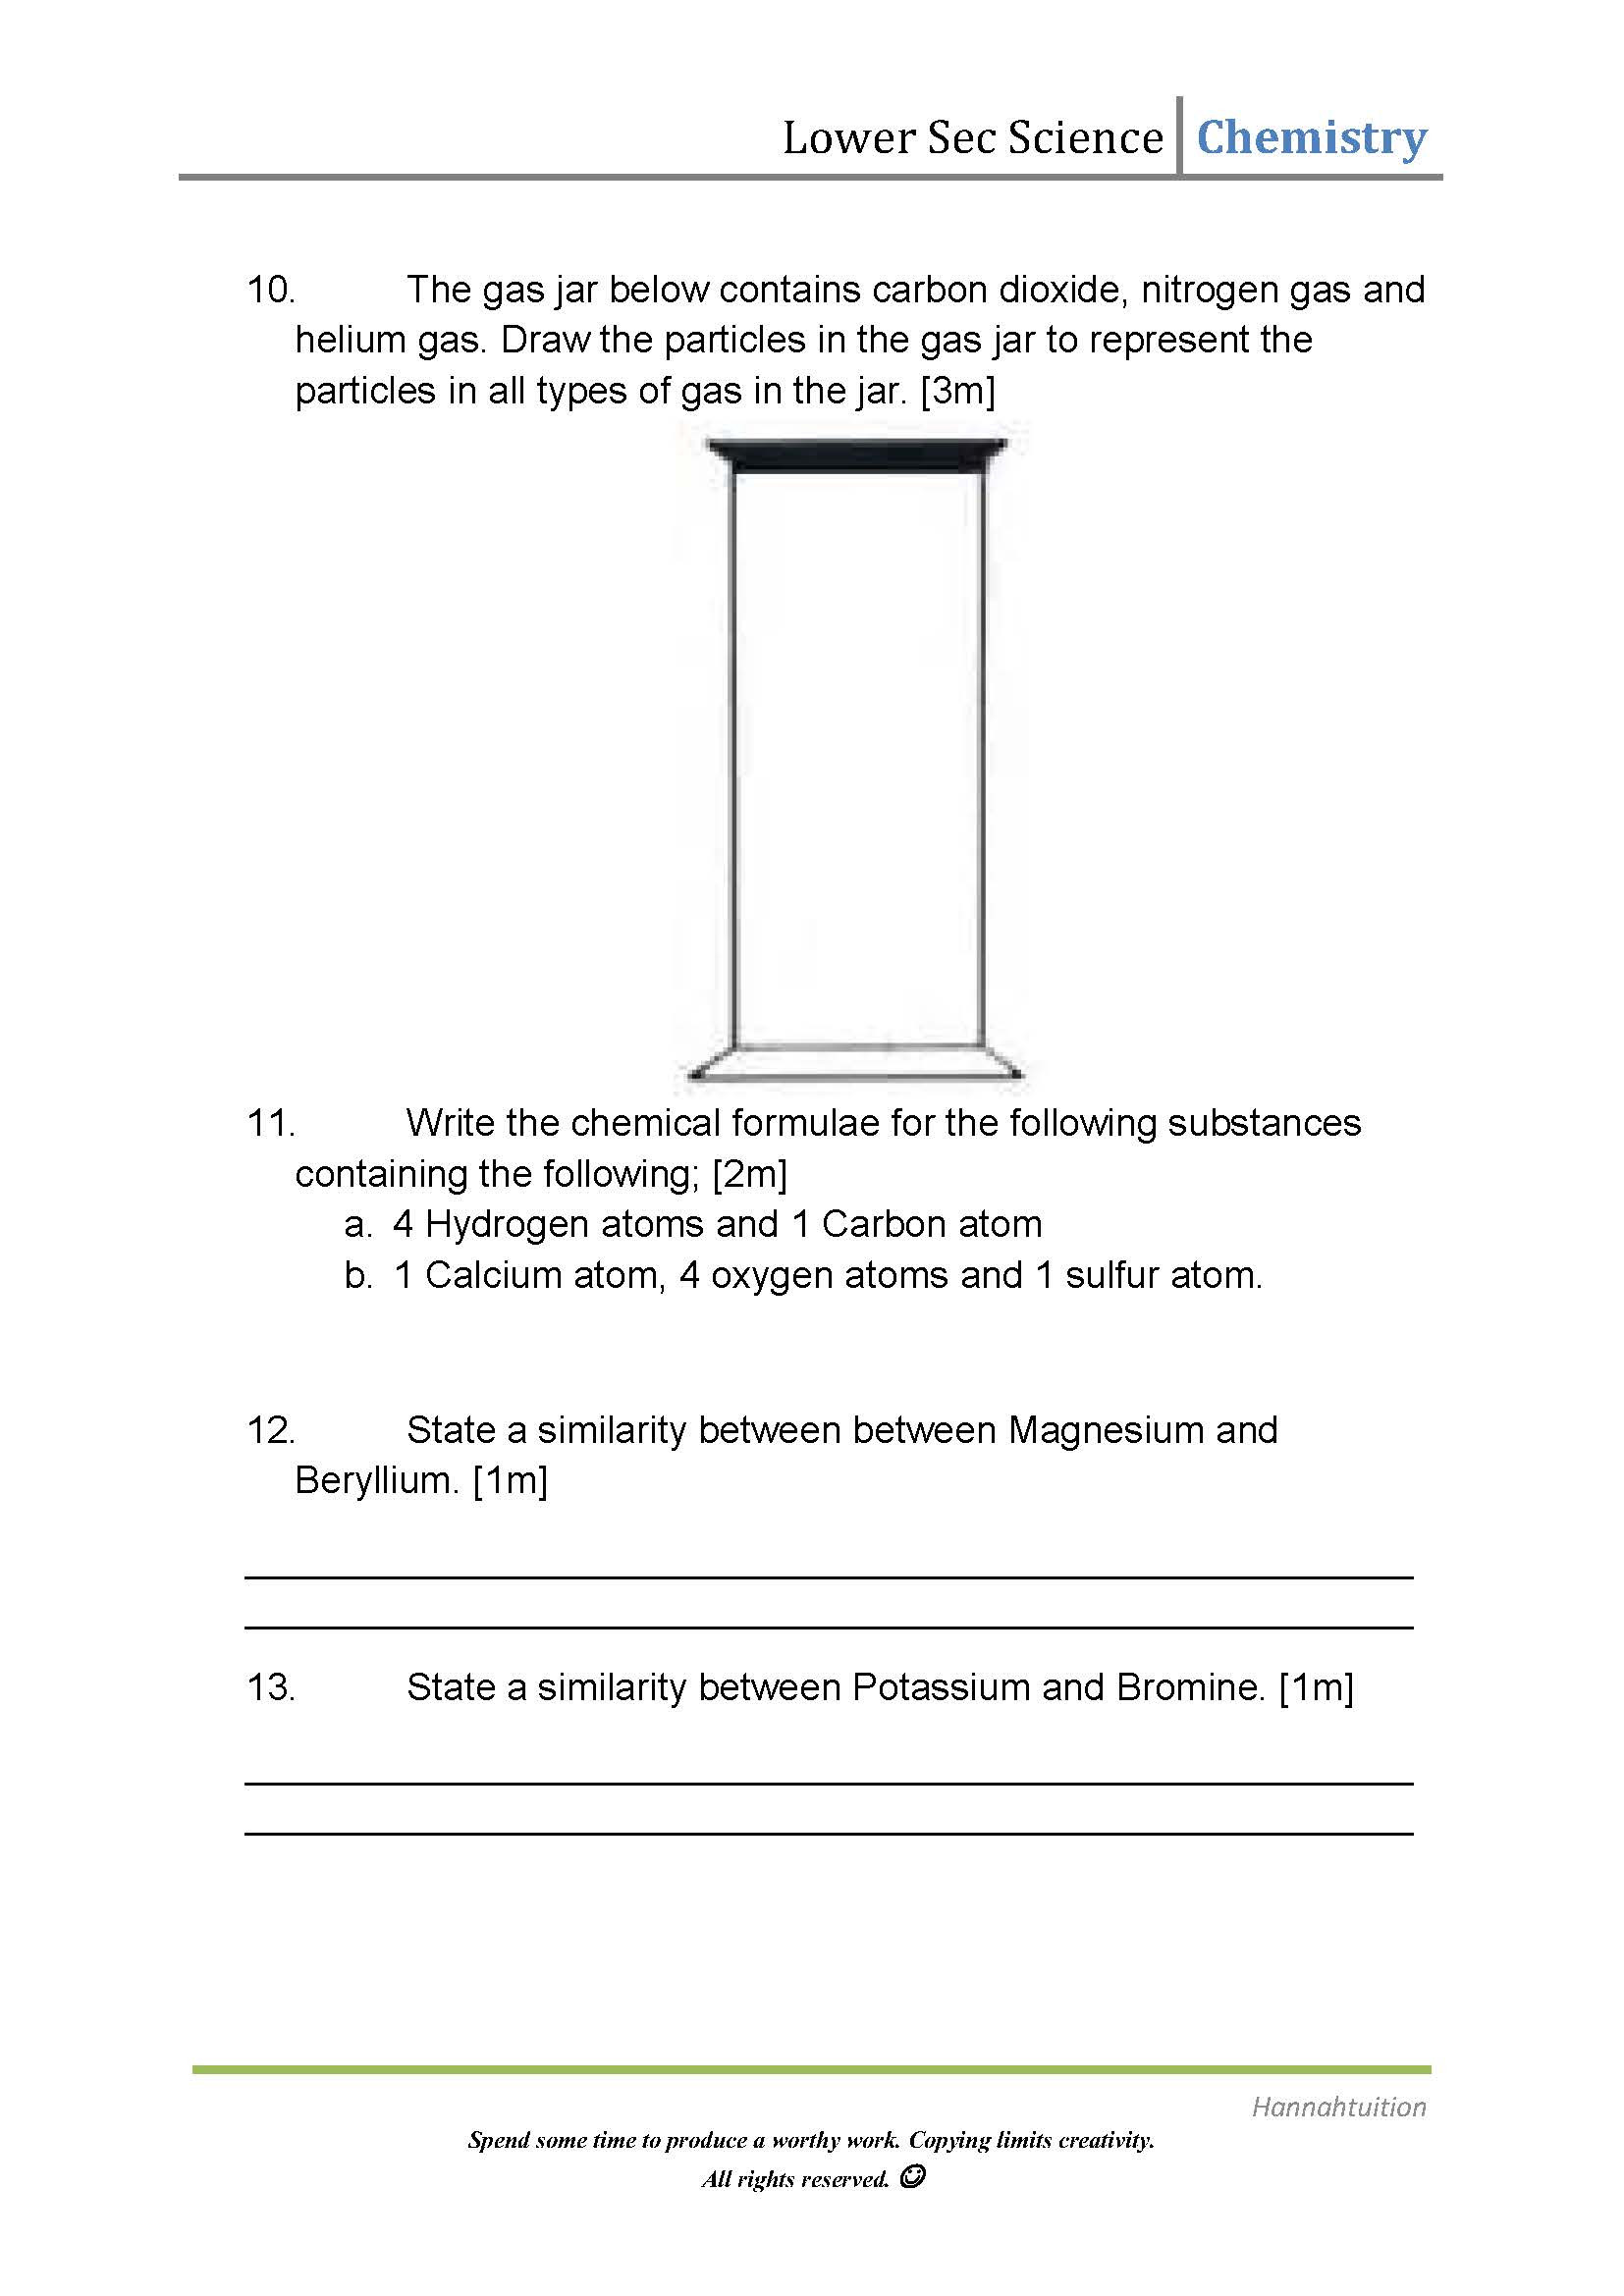 Atoms and Ions Worksheet Lower Sec atoms Molecules and Ions Quiz – Hannahtuition